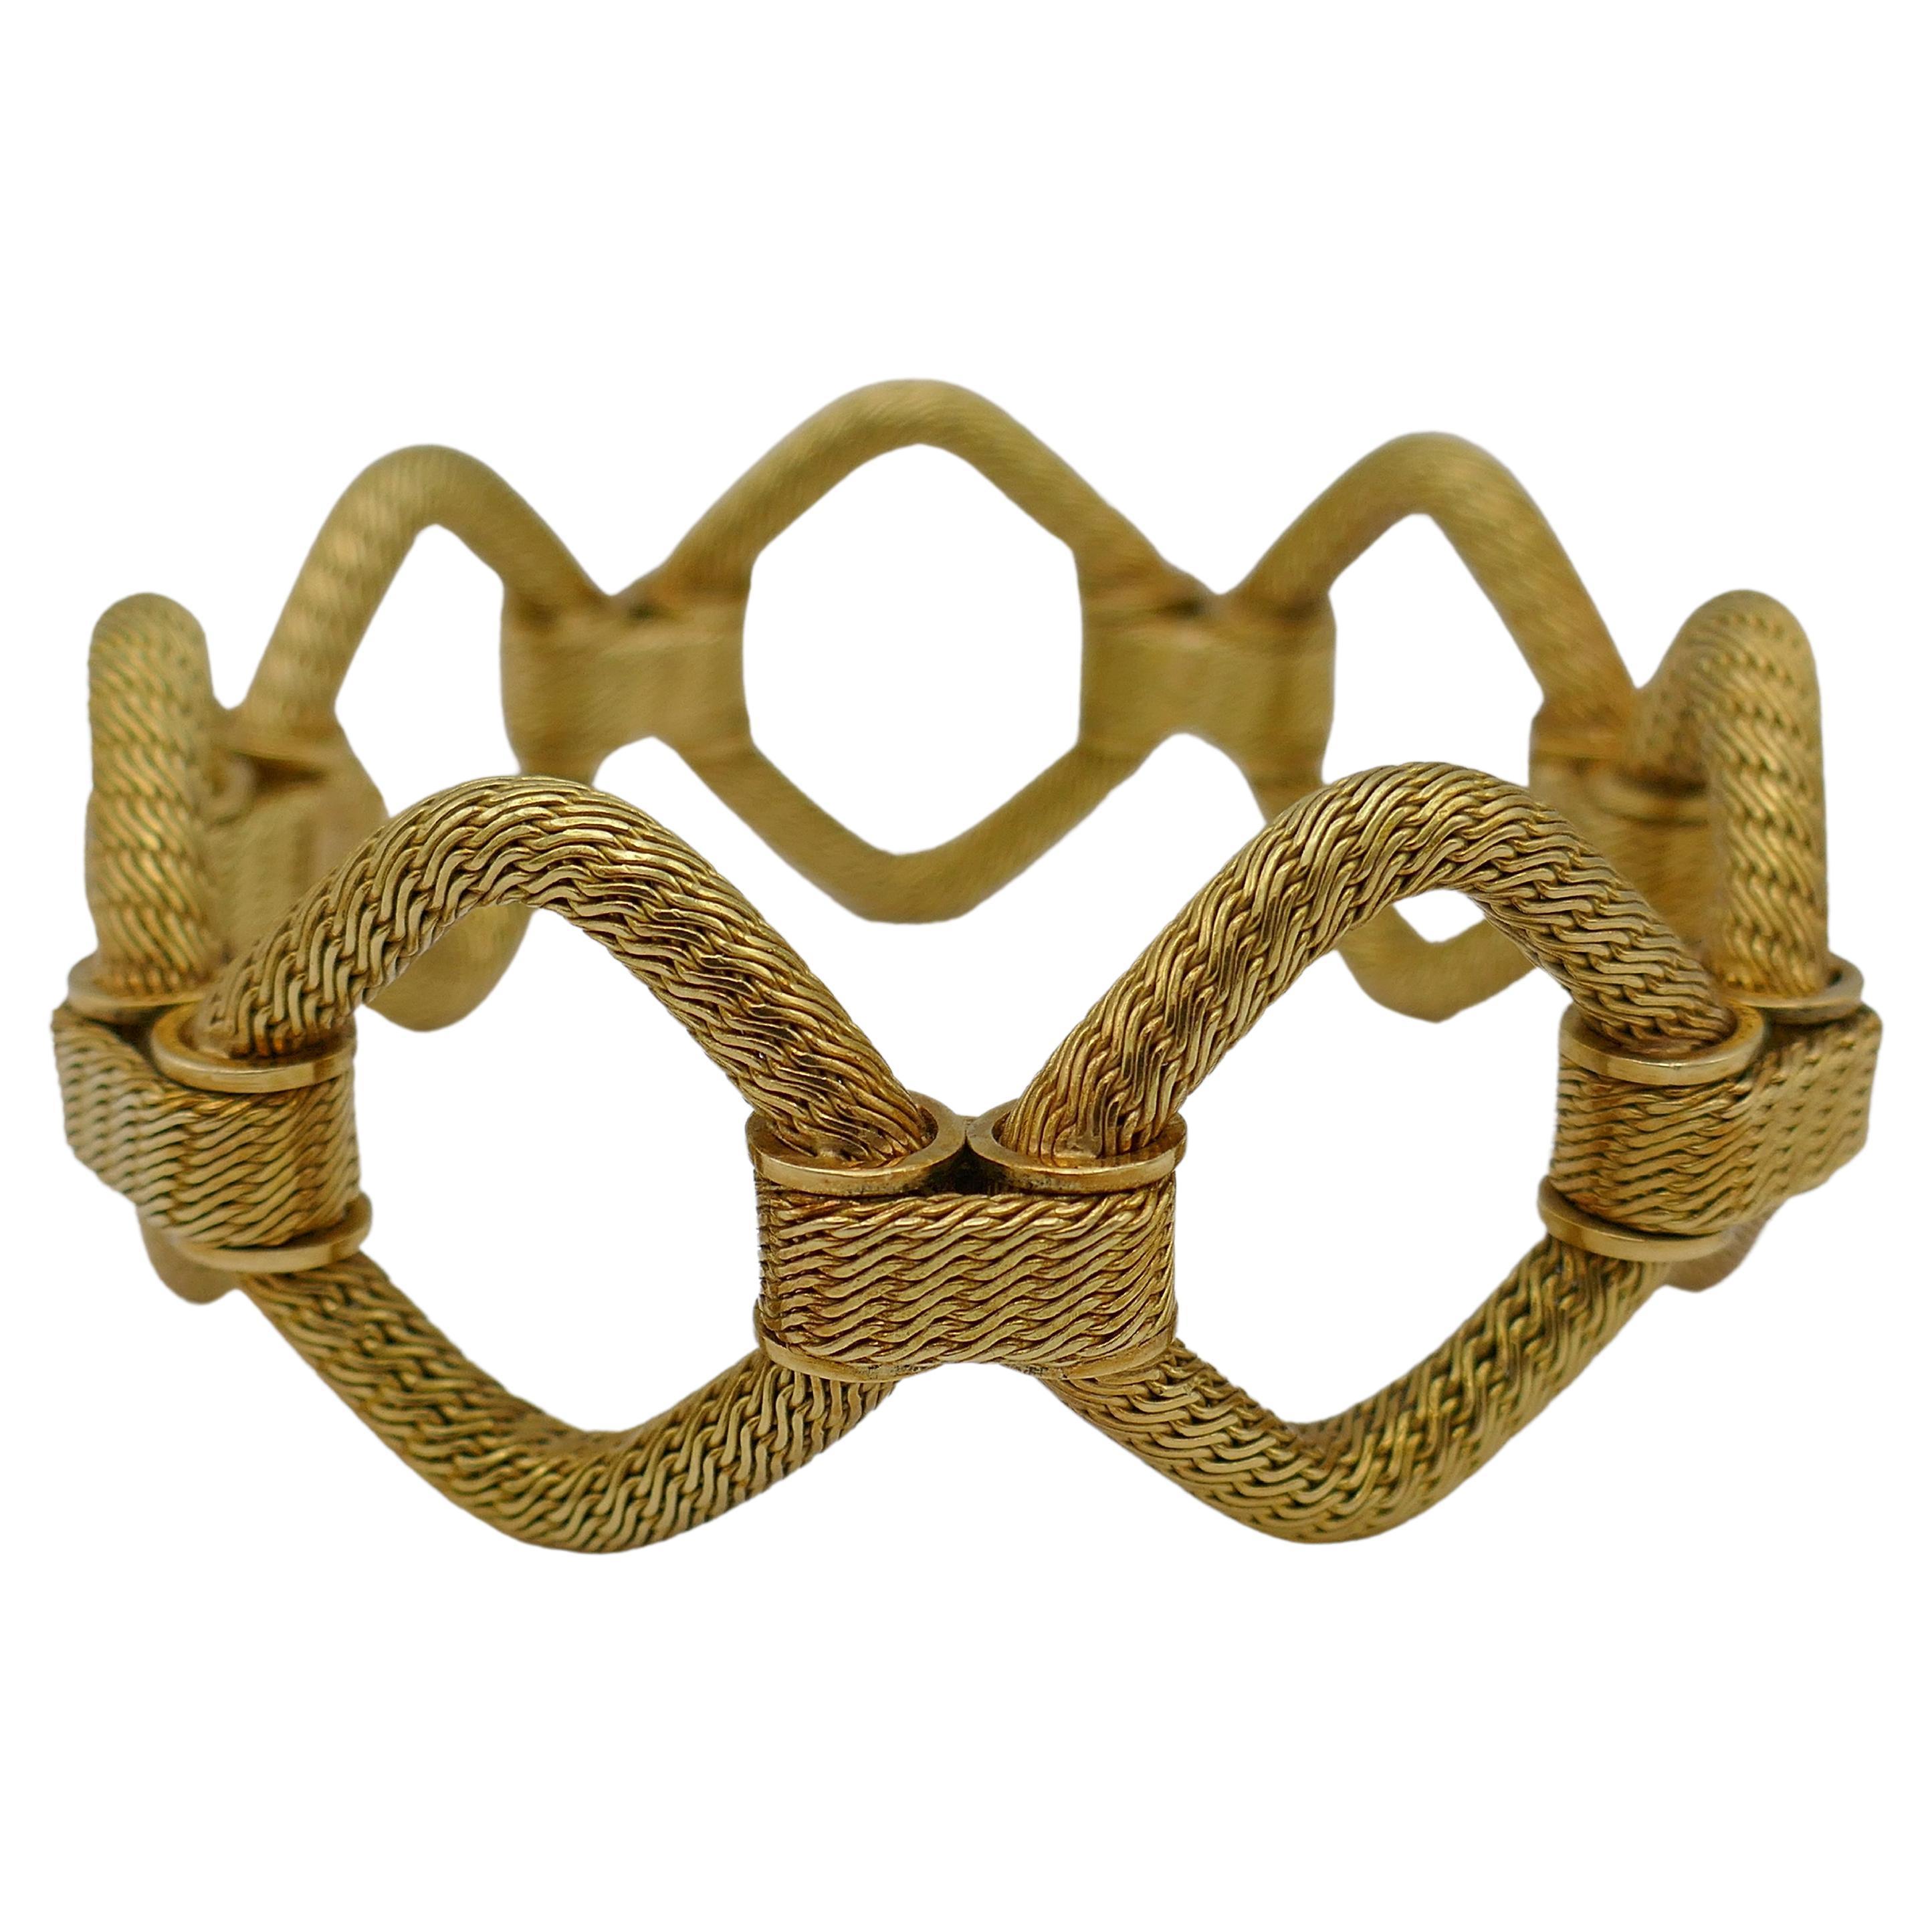 An exquisite vintage 18k gold bracelet with a silky-soft rope design.
The gold is smooth and gently shimmering.
The links are styled as the open-work rhombus connected by the flat woven stripes.
This bracelet is a unique looking piece made with the